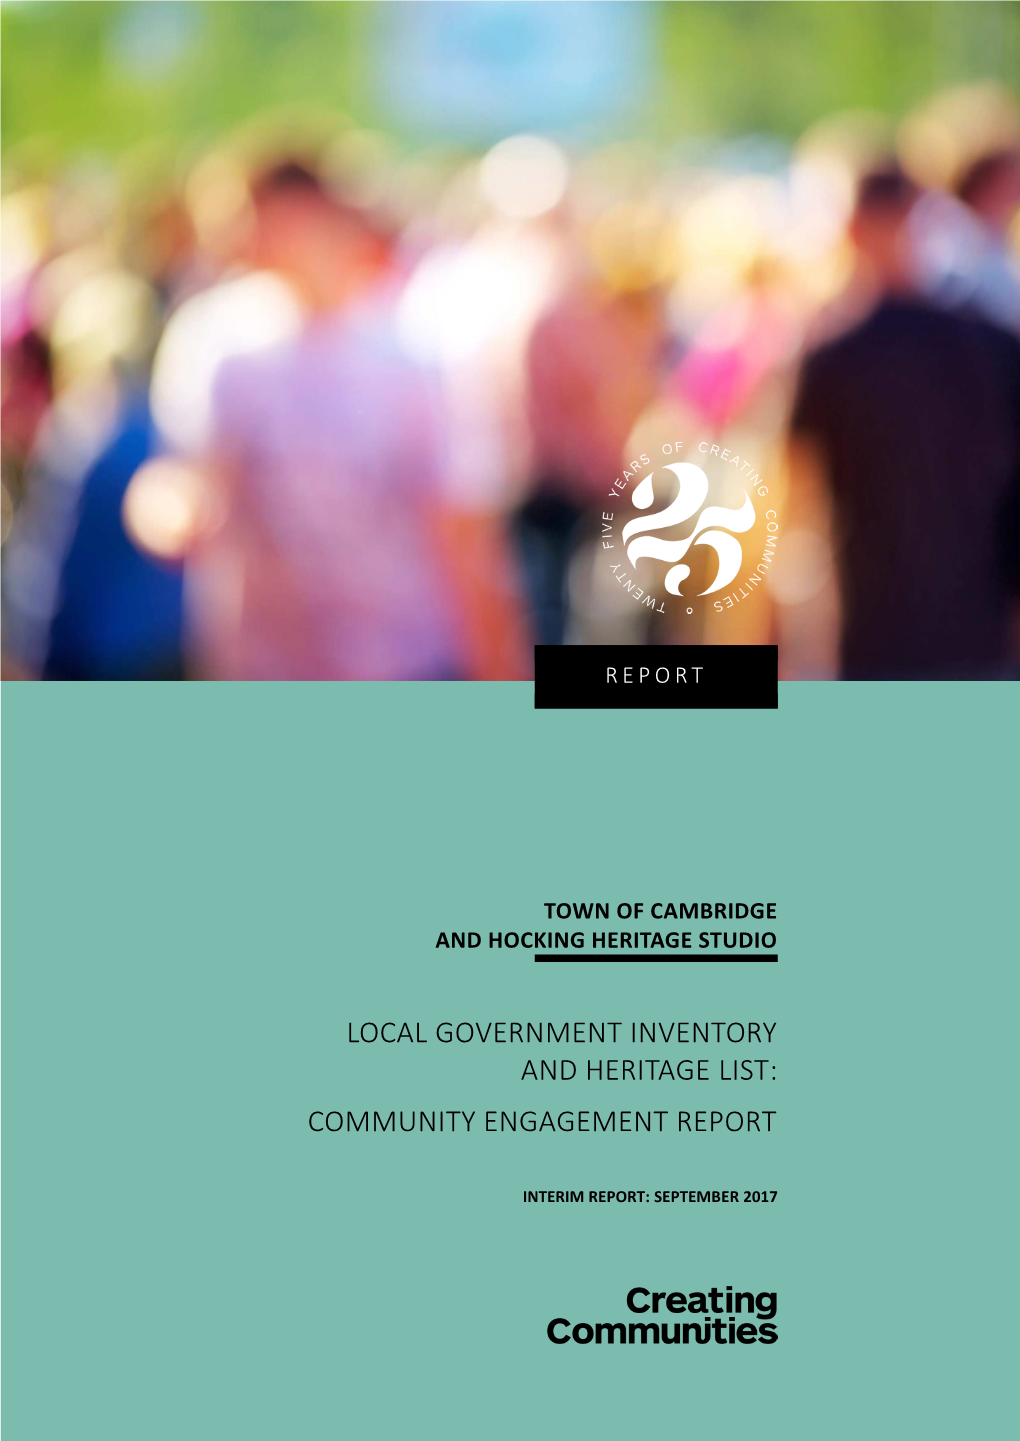 Local Government Inventory and Heritage List: Community Engagement Report